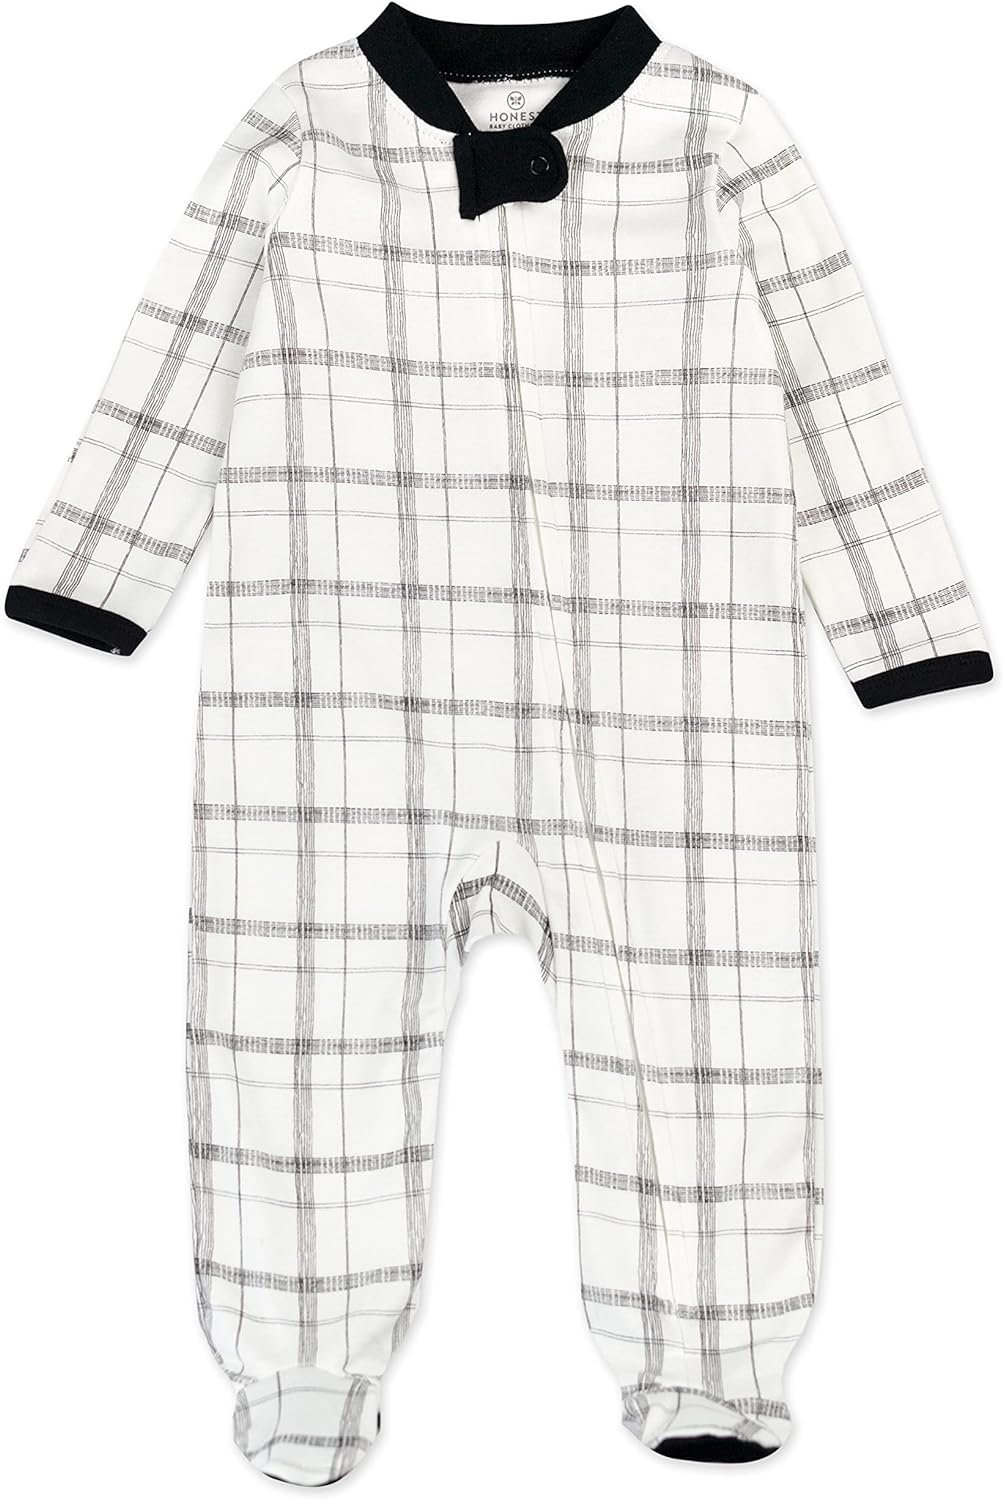 HonestBaby Footed Sleep & Play Pajamas Organic Cotton for Infant Baby Boys (LEGACY) Review